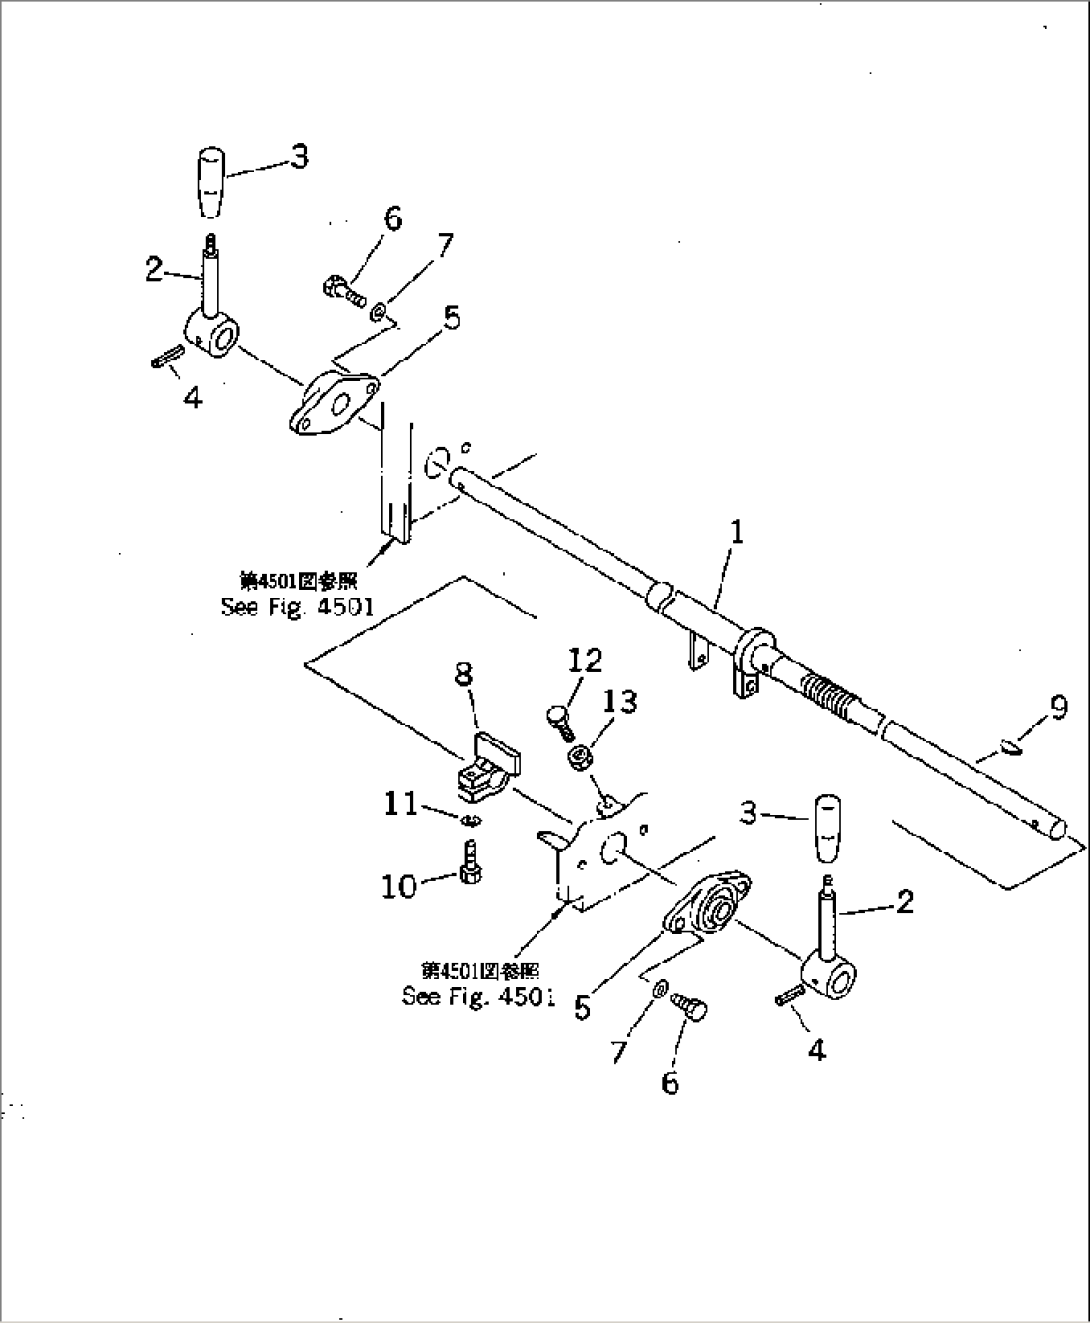 TRAVEL CONTROL (2/3) (LEVER AND LINKAGE)